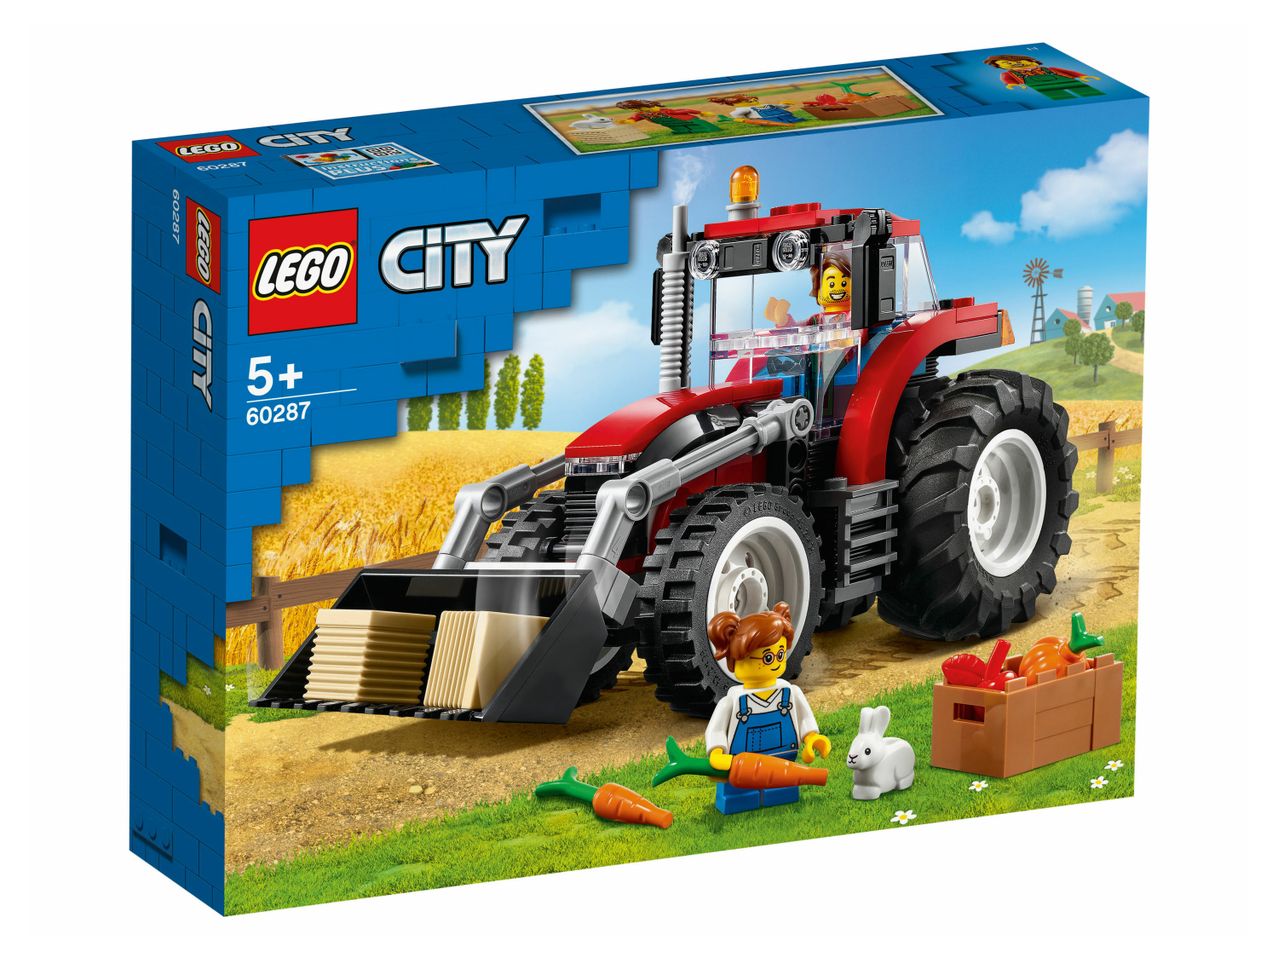 Go to full screen view: Lego Play Set Assortment - Image 1